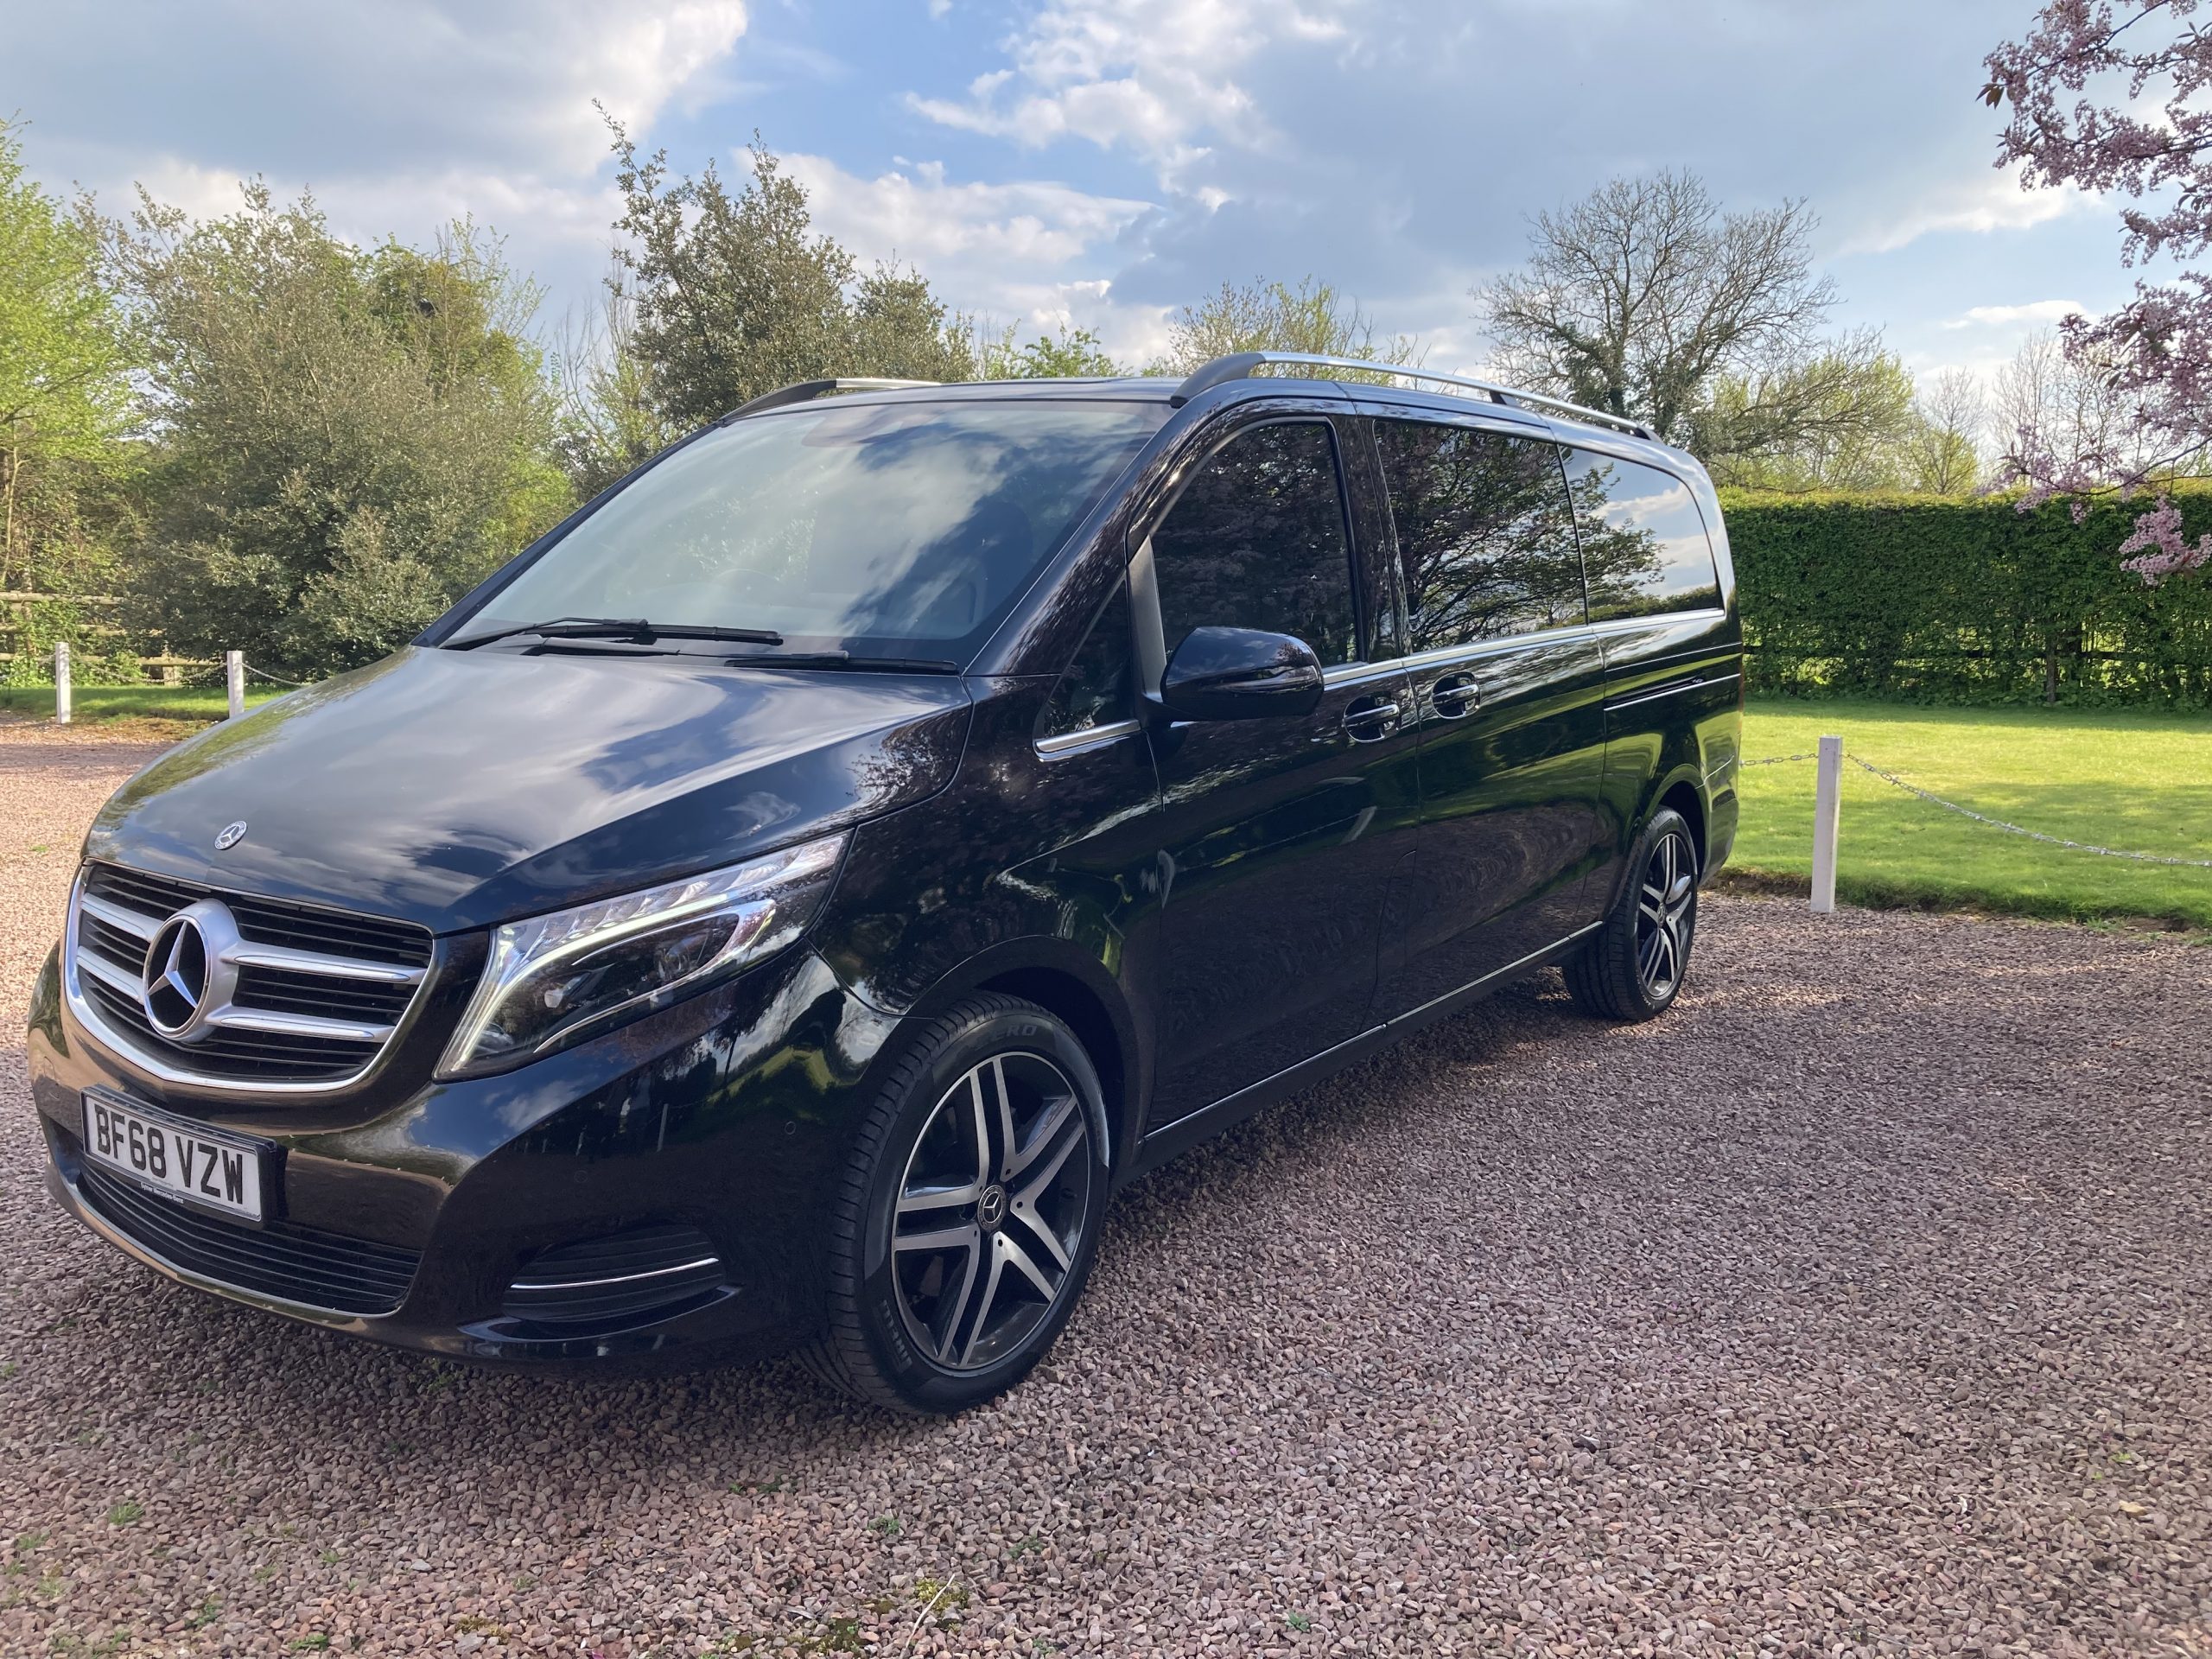 Chauffeured transport for corporate events with Mercedes Executive MPV.  Book now at 01684 355012